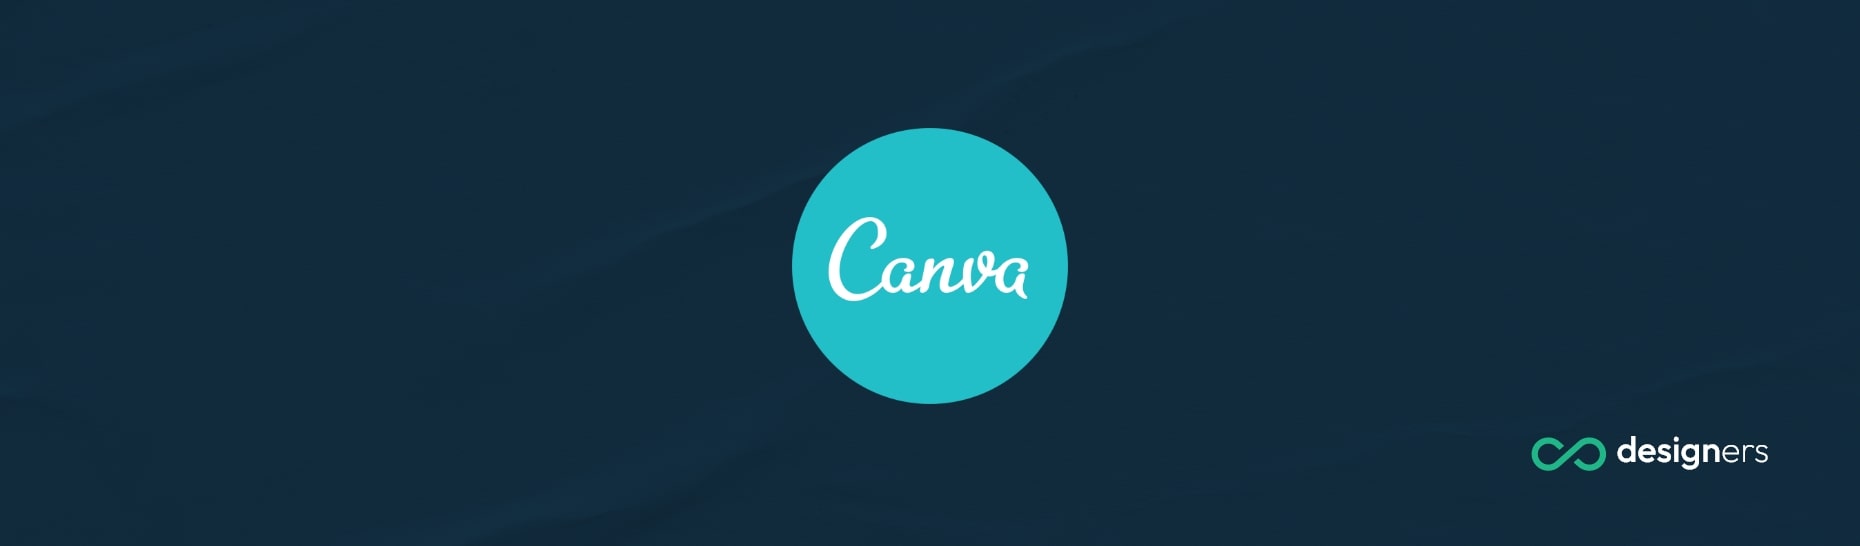 What Font Is Myriad in Canva?